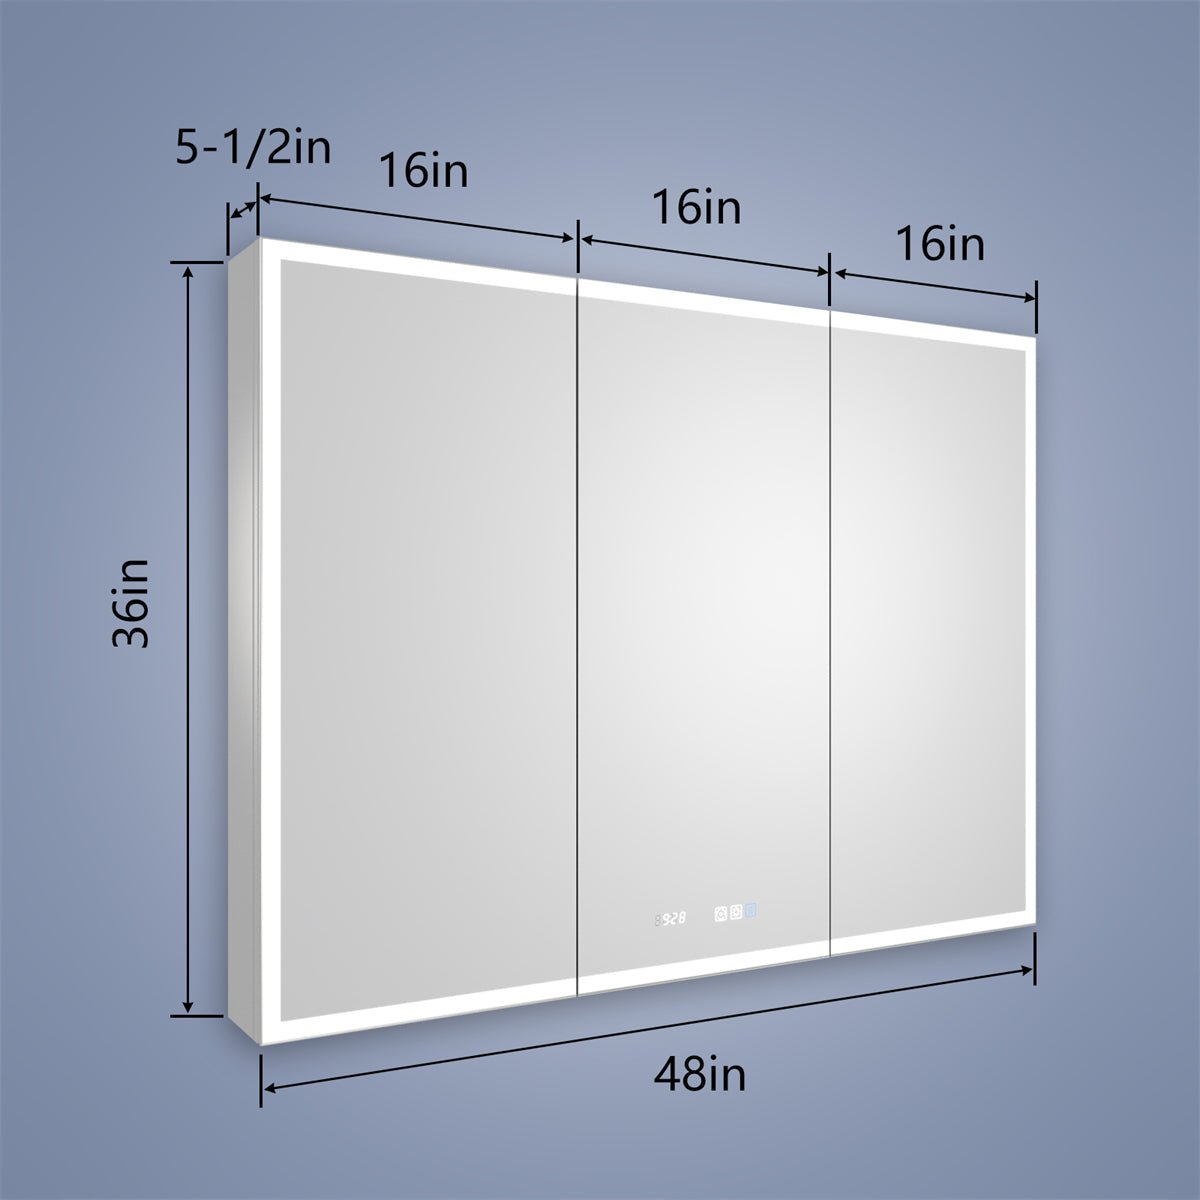 Rim 48" W x 36" H Led Lighted Medicine Cabinet Recessed or Surface with Clock and mirrors